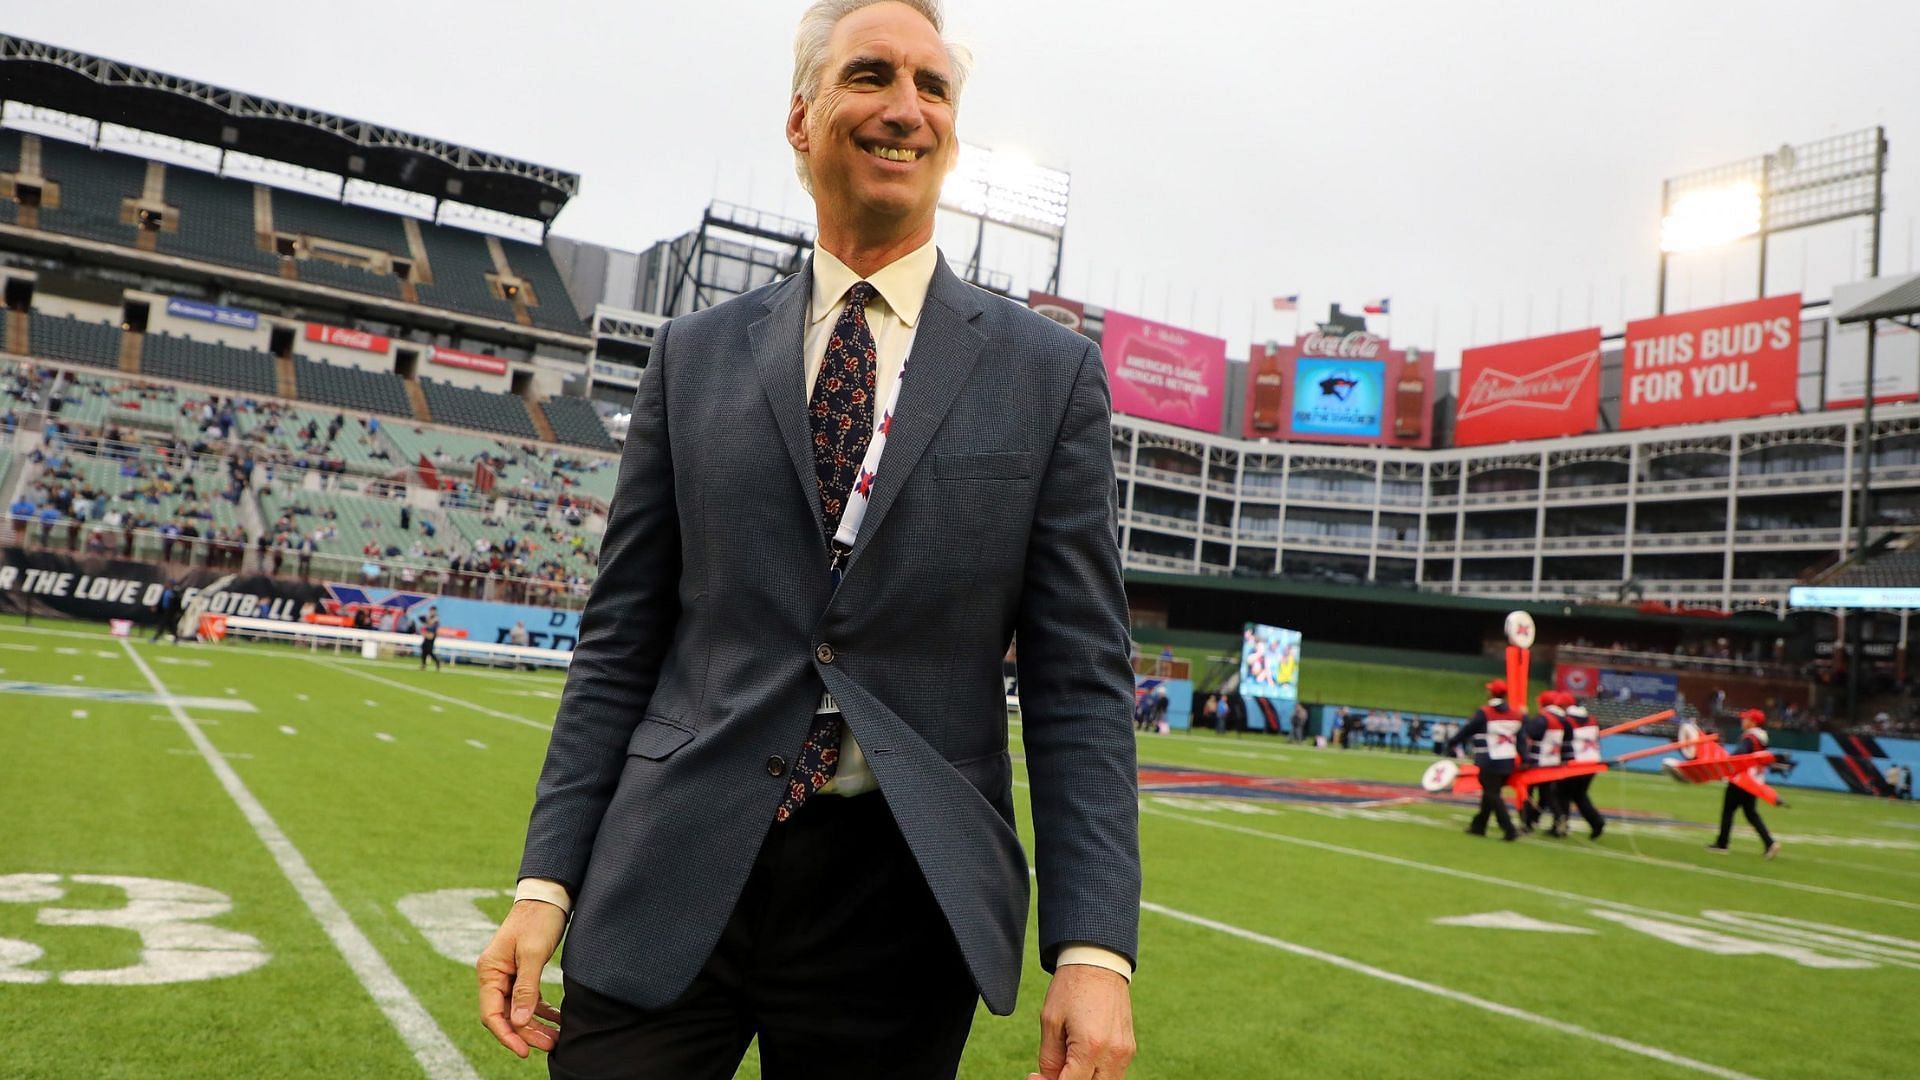 Who is Oliver Luck? Possibly the savior the Pac-12 needs